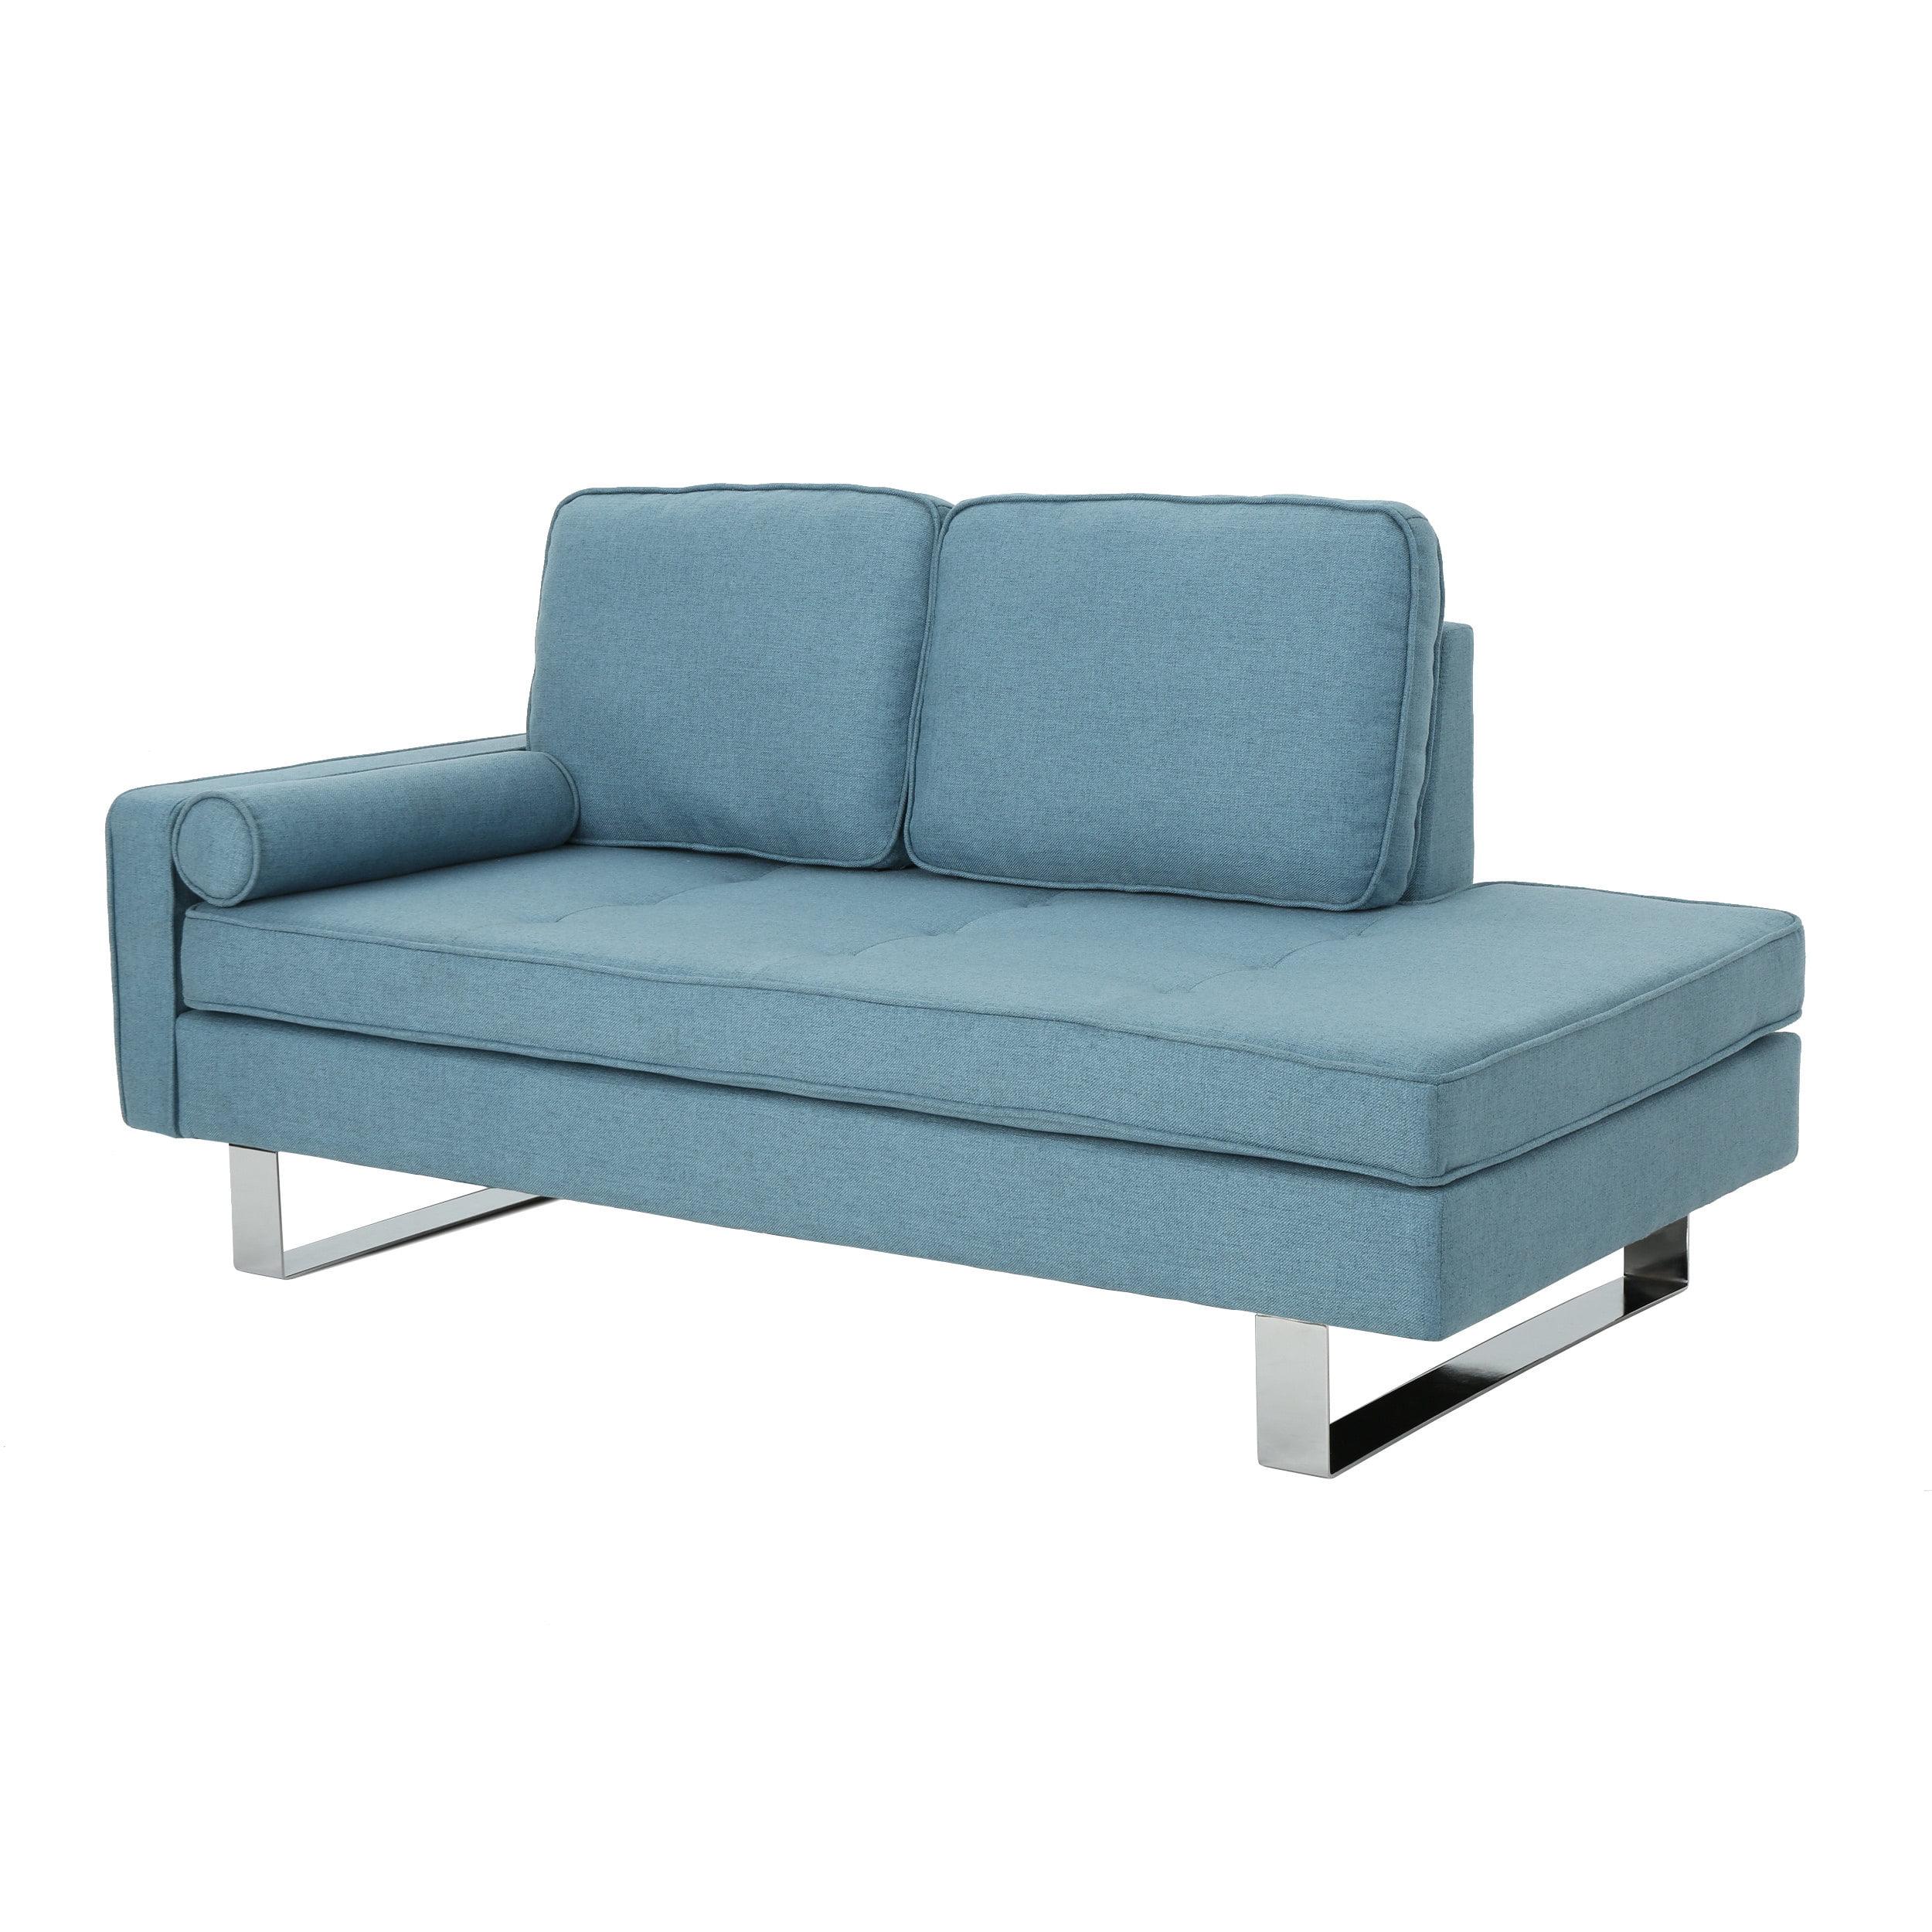 Damas Modern Deep Seating Fabric Chaise Lounge, Blue and Silver